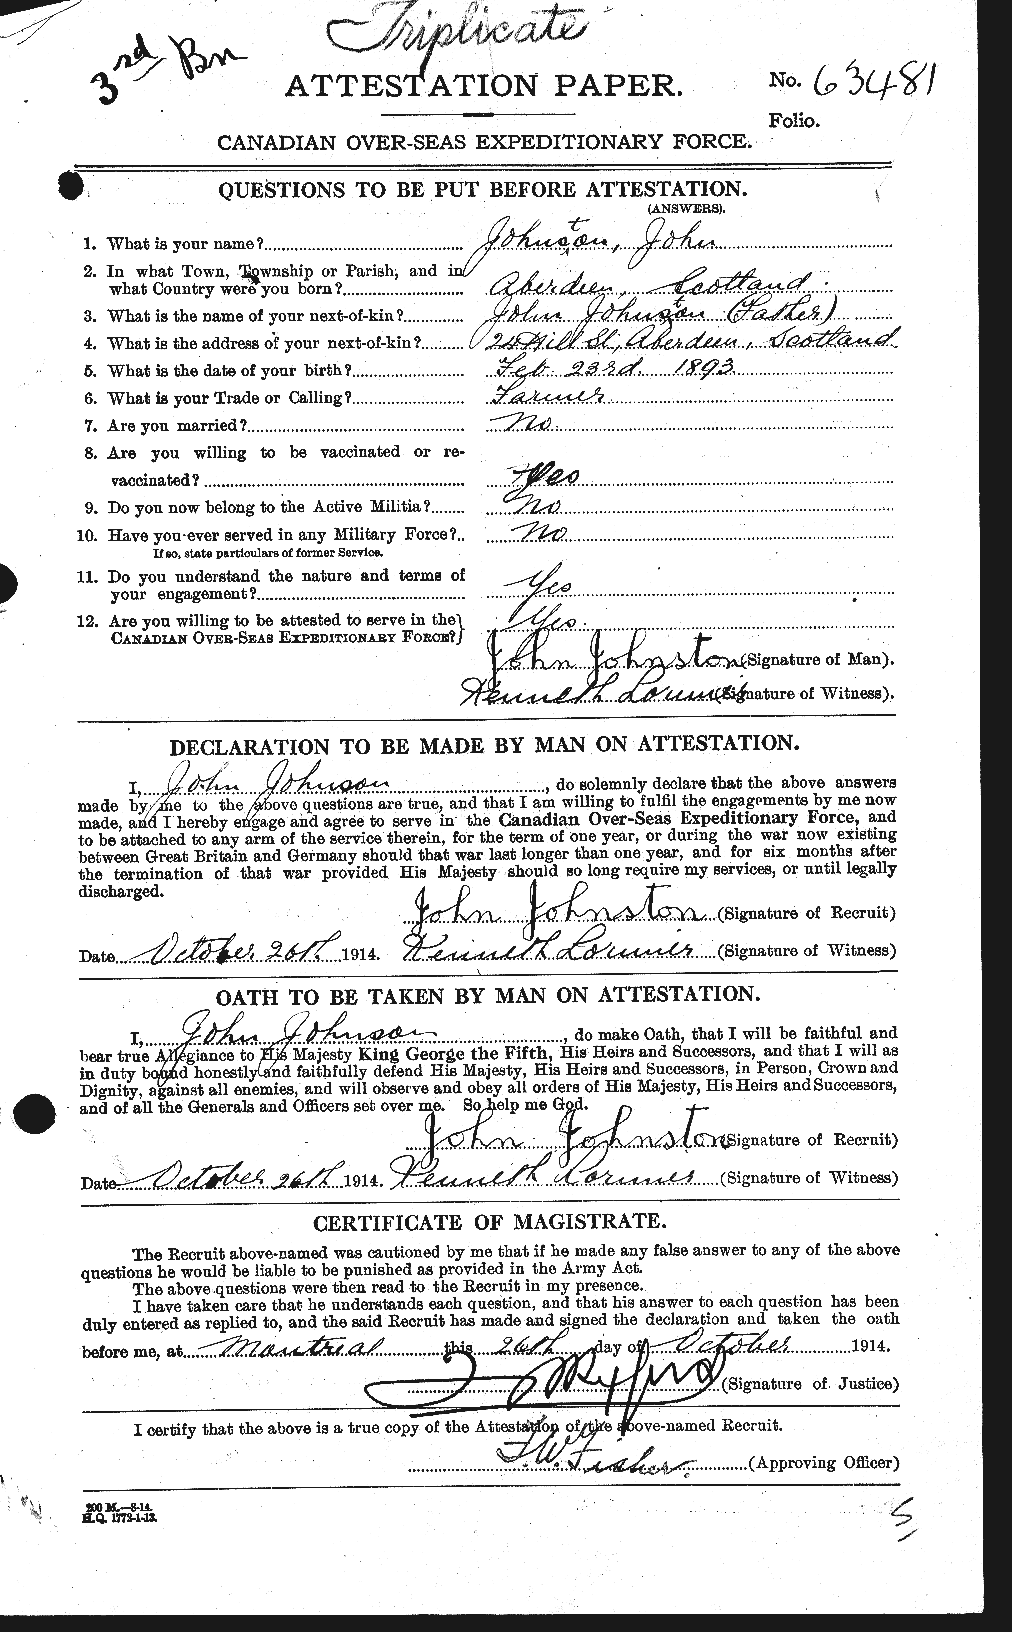 Personnel Records of the First World War - CEF 422780a